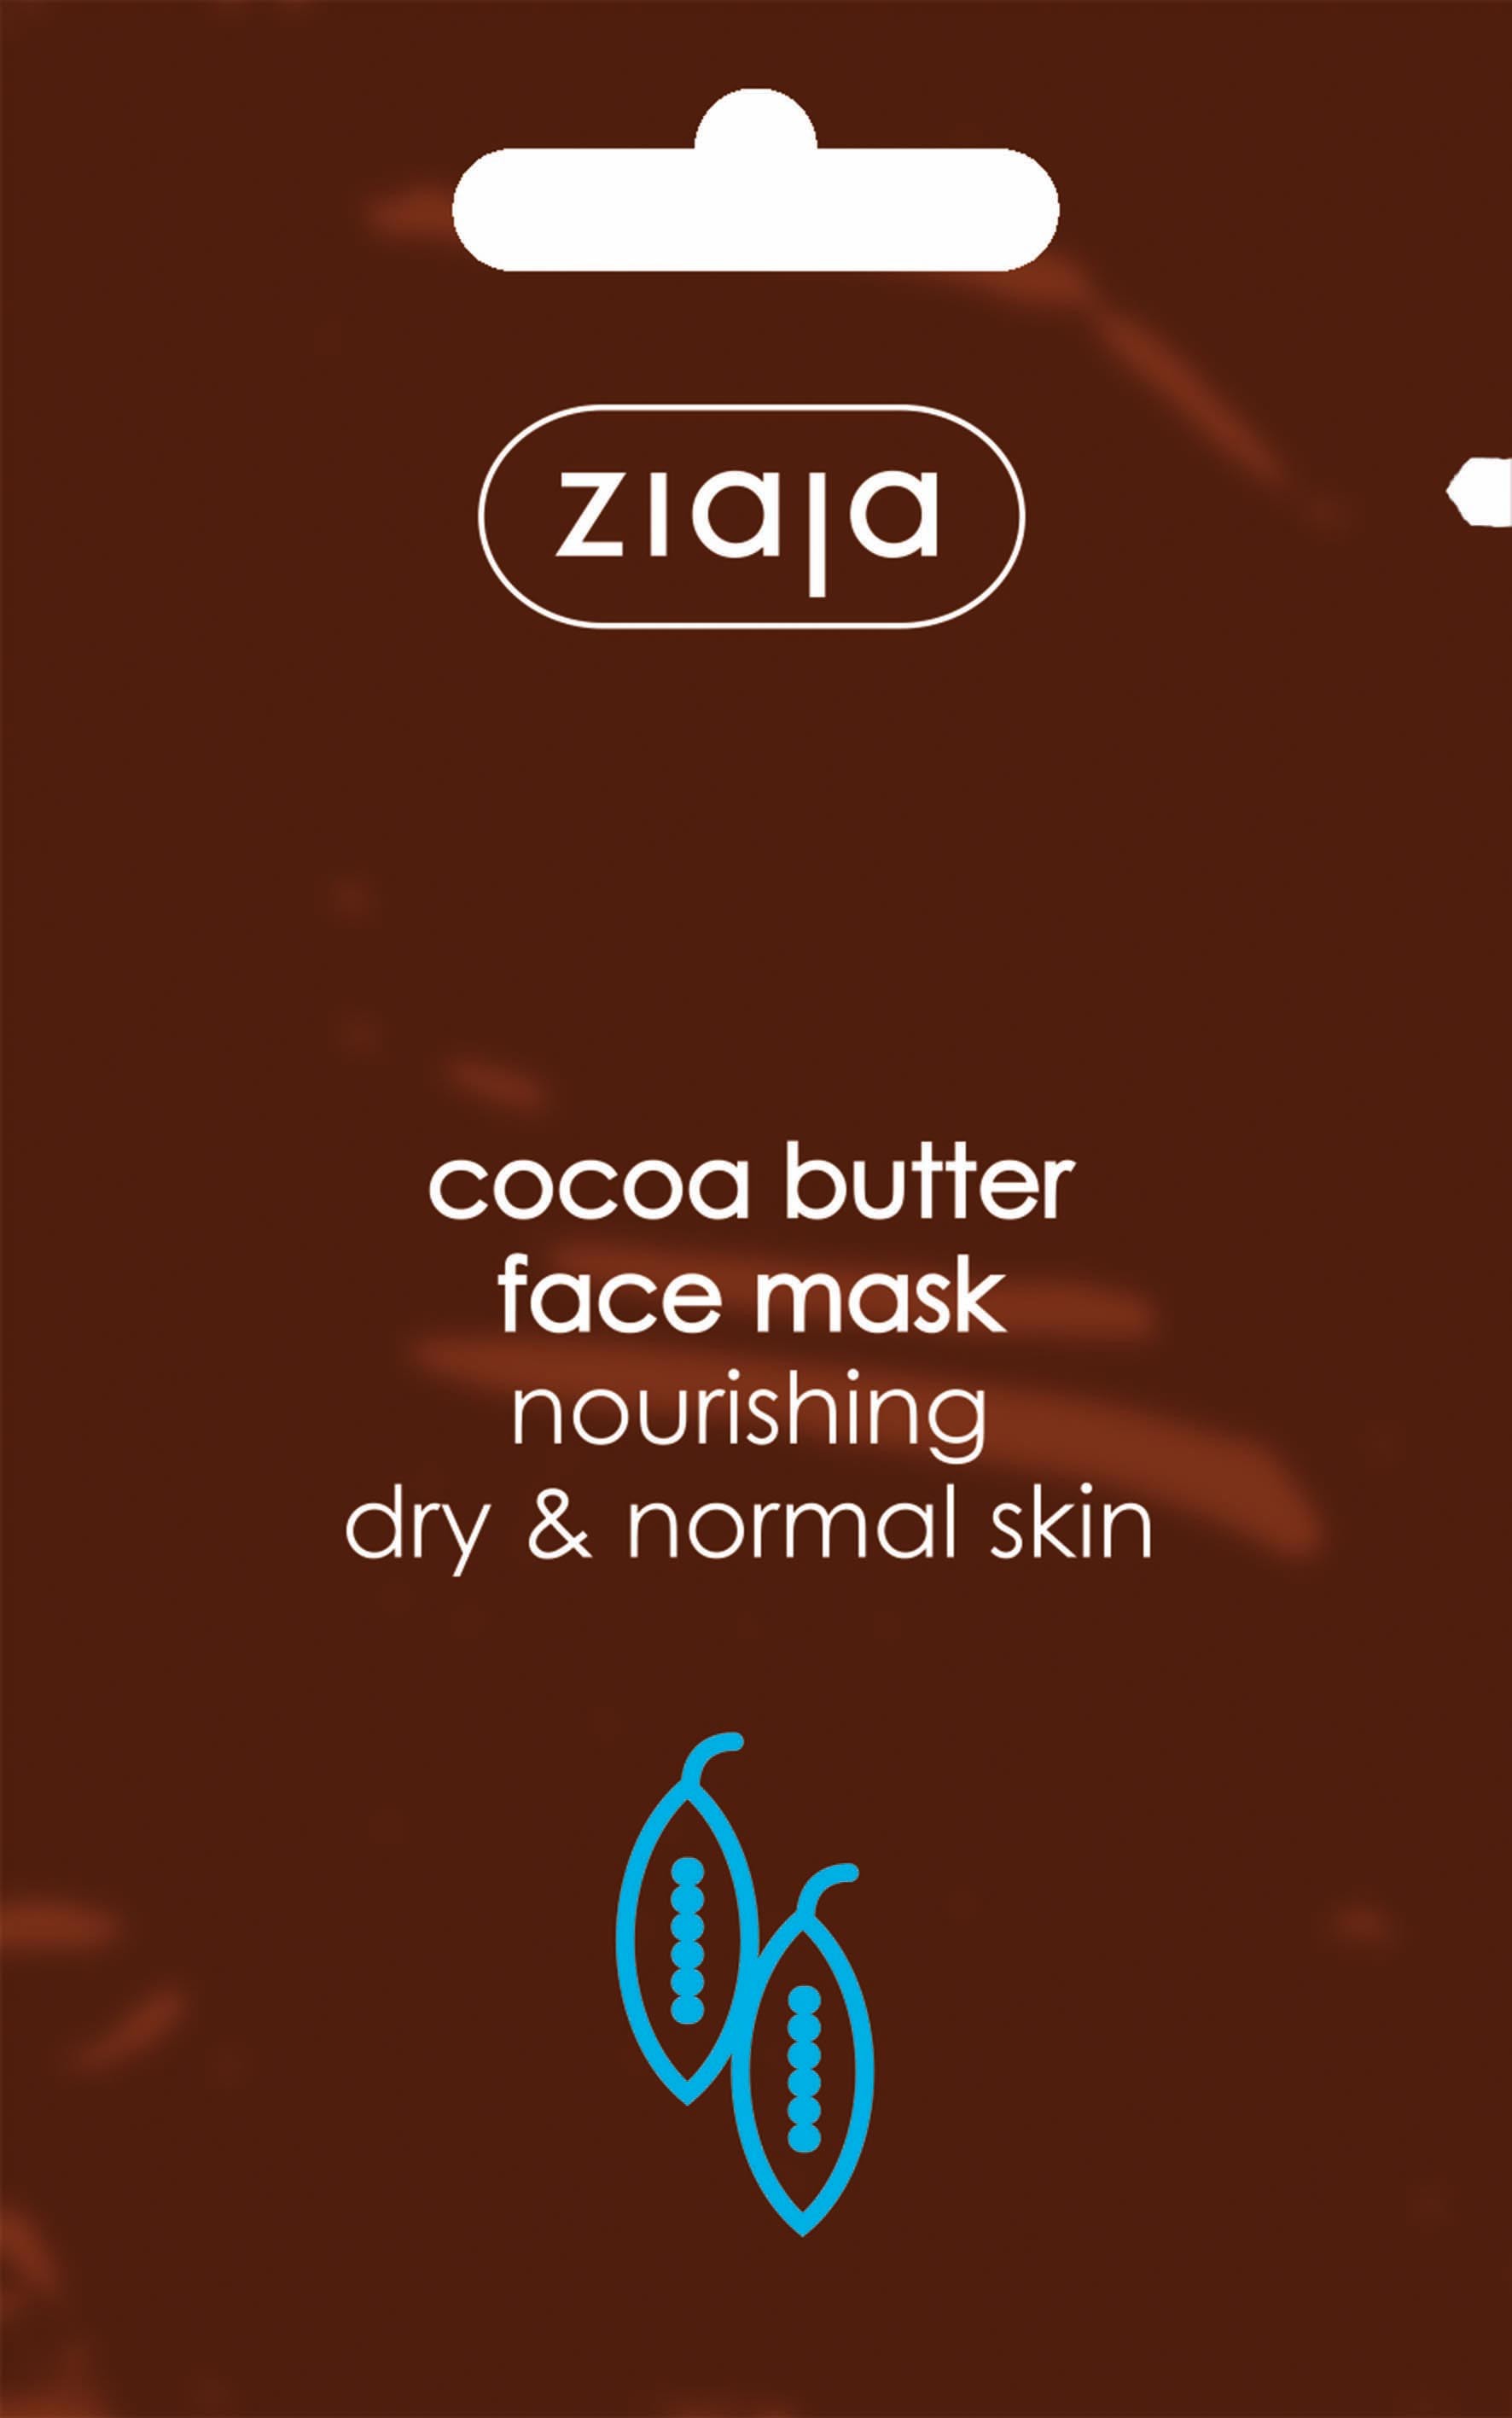 Ziaja Cocoa Butter Face Mask 7ml